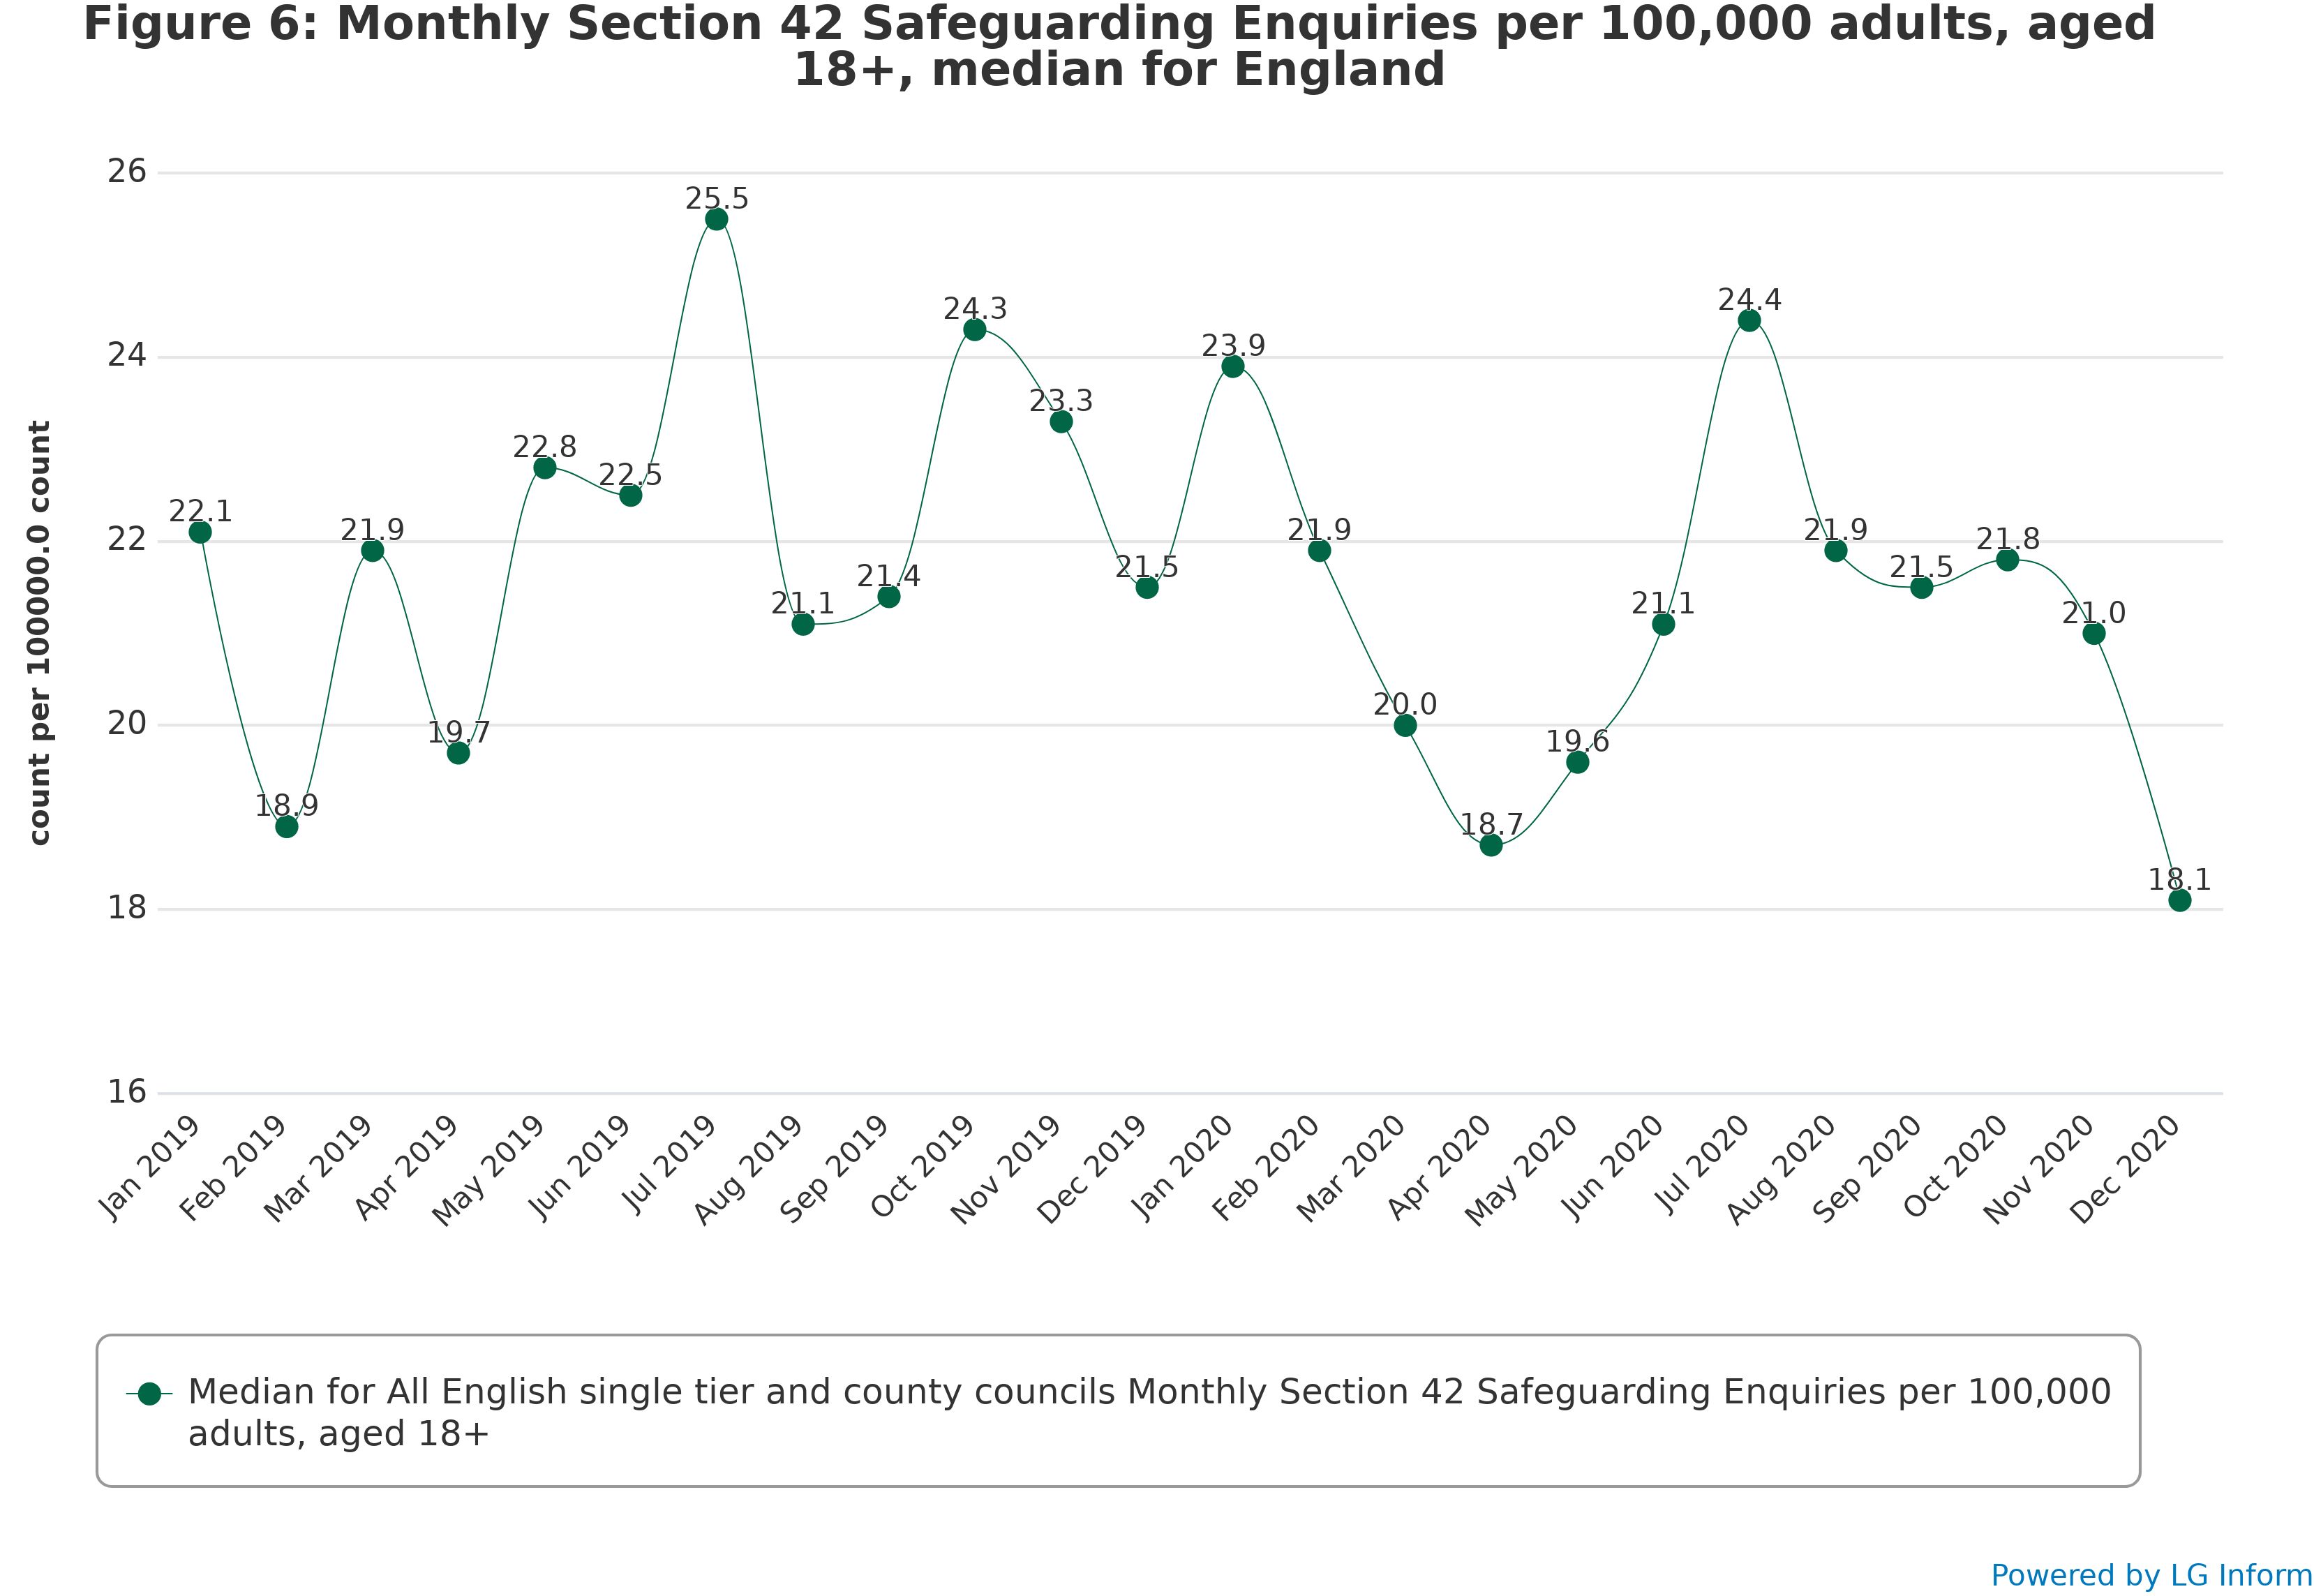 Figure 6: Monthly Section 42 Safeguarding Enquiries per 100,000 adults, aged 18+, median for England